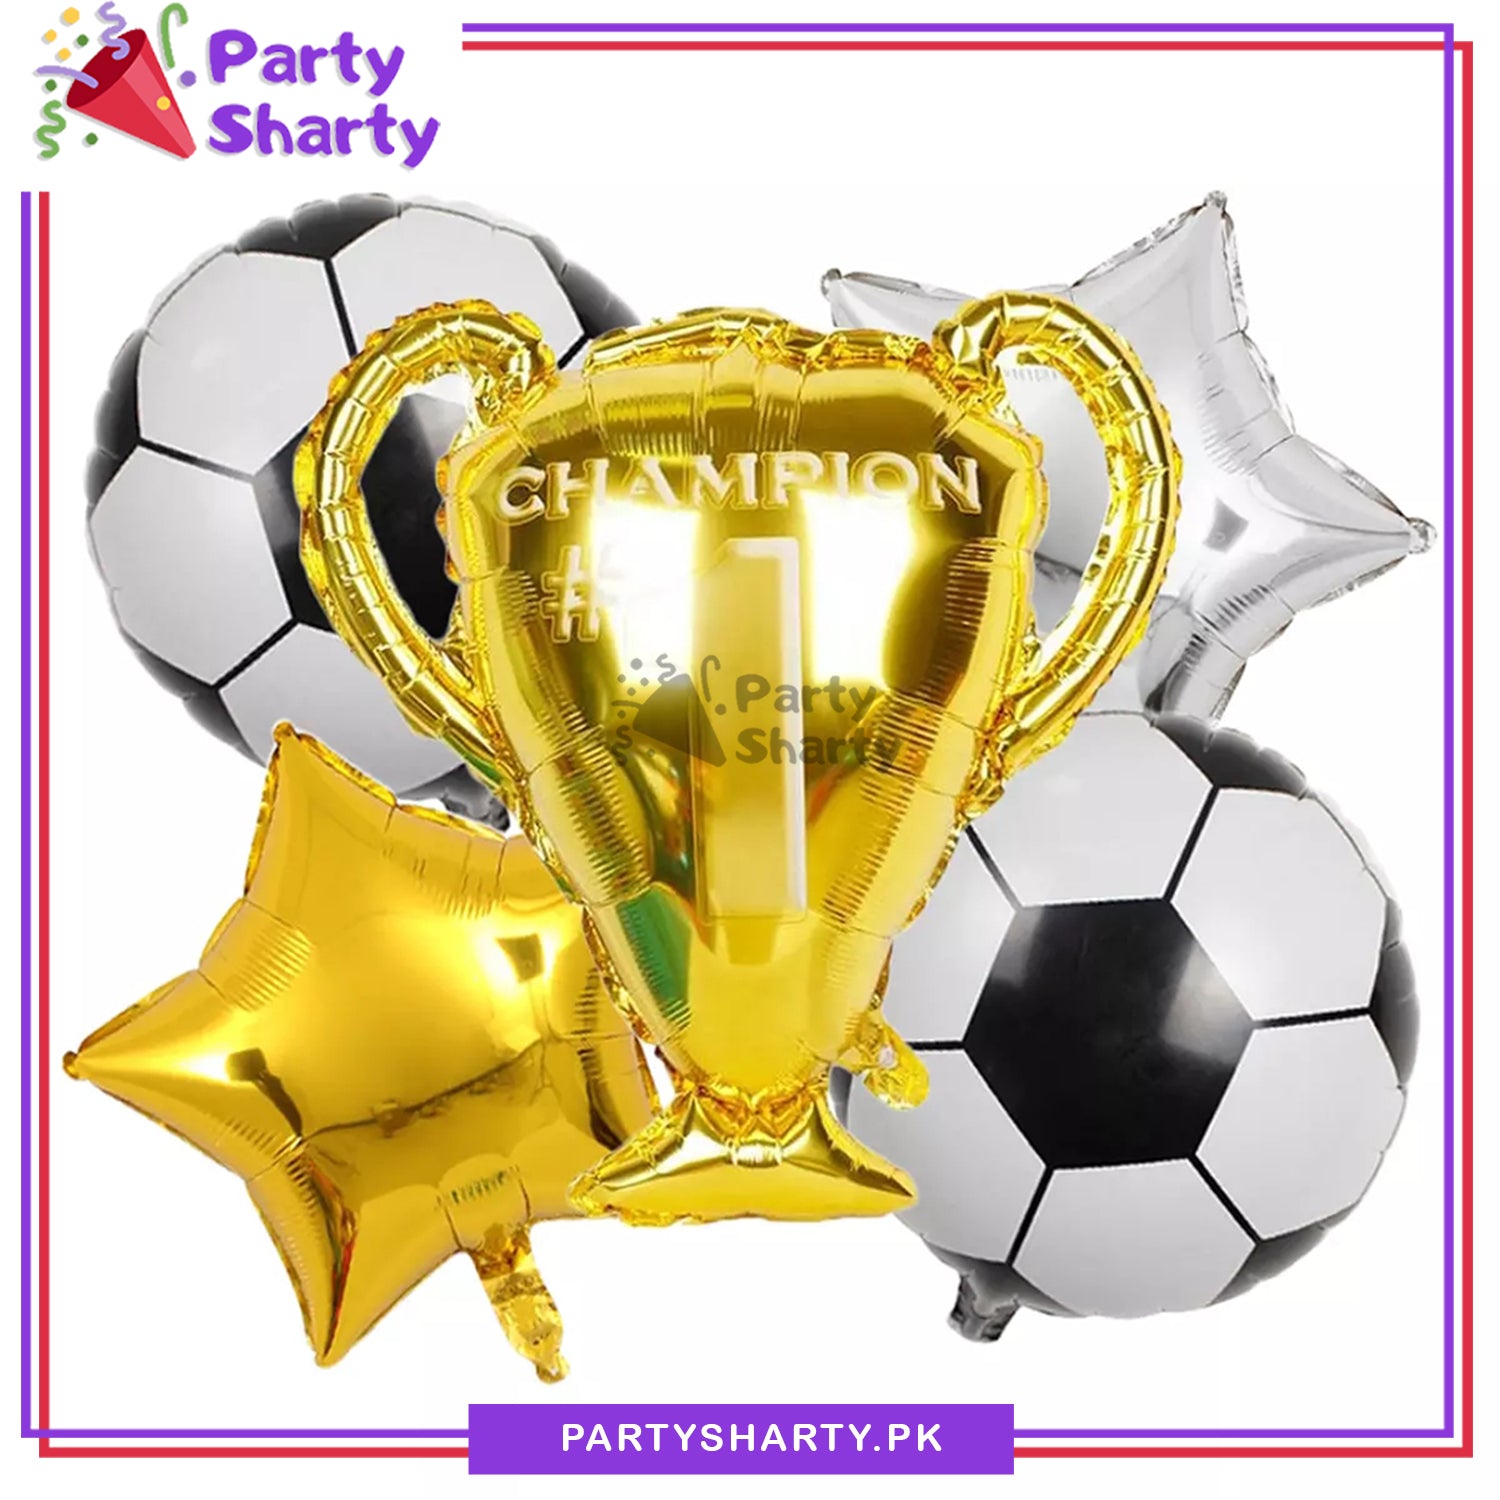 Champion # 1 Foil Balloons Set of 5 For Foot Ball Theme Birthday Decoration and Celebration